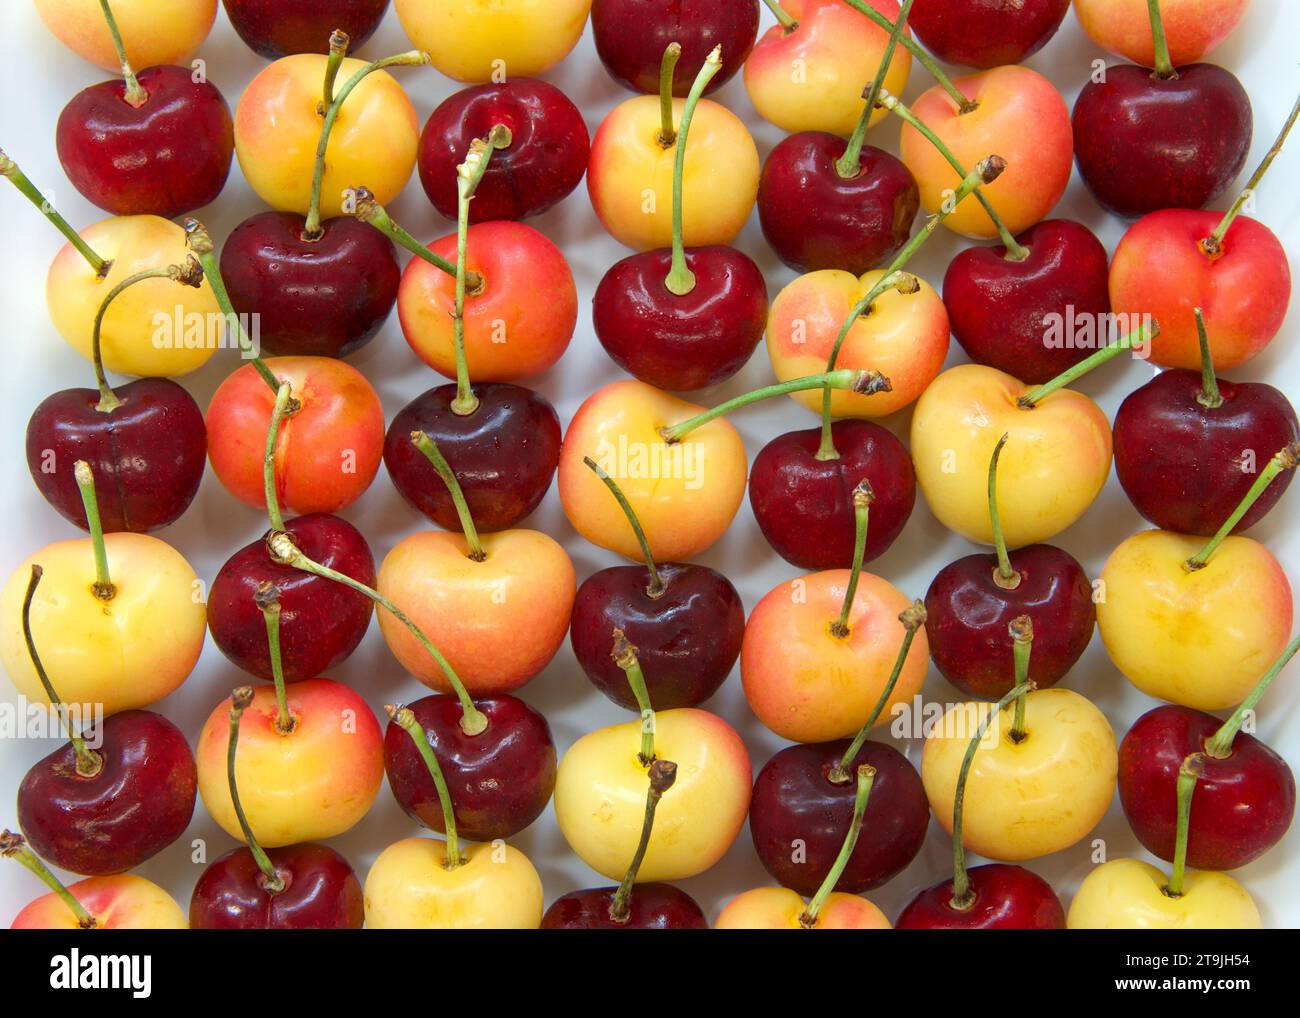 Top view of Bing Cherries and Rainier Cherries with stems lined up on a porcelain plate. Fresh seasonal fruit. Stock Photo